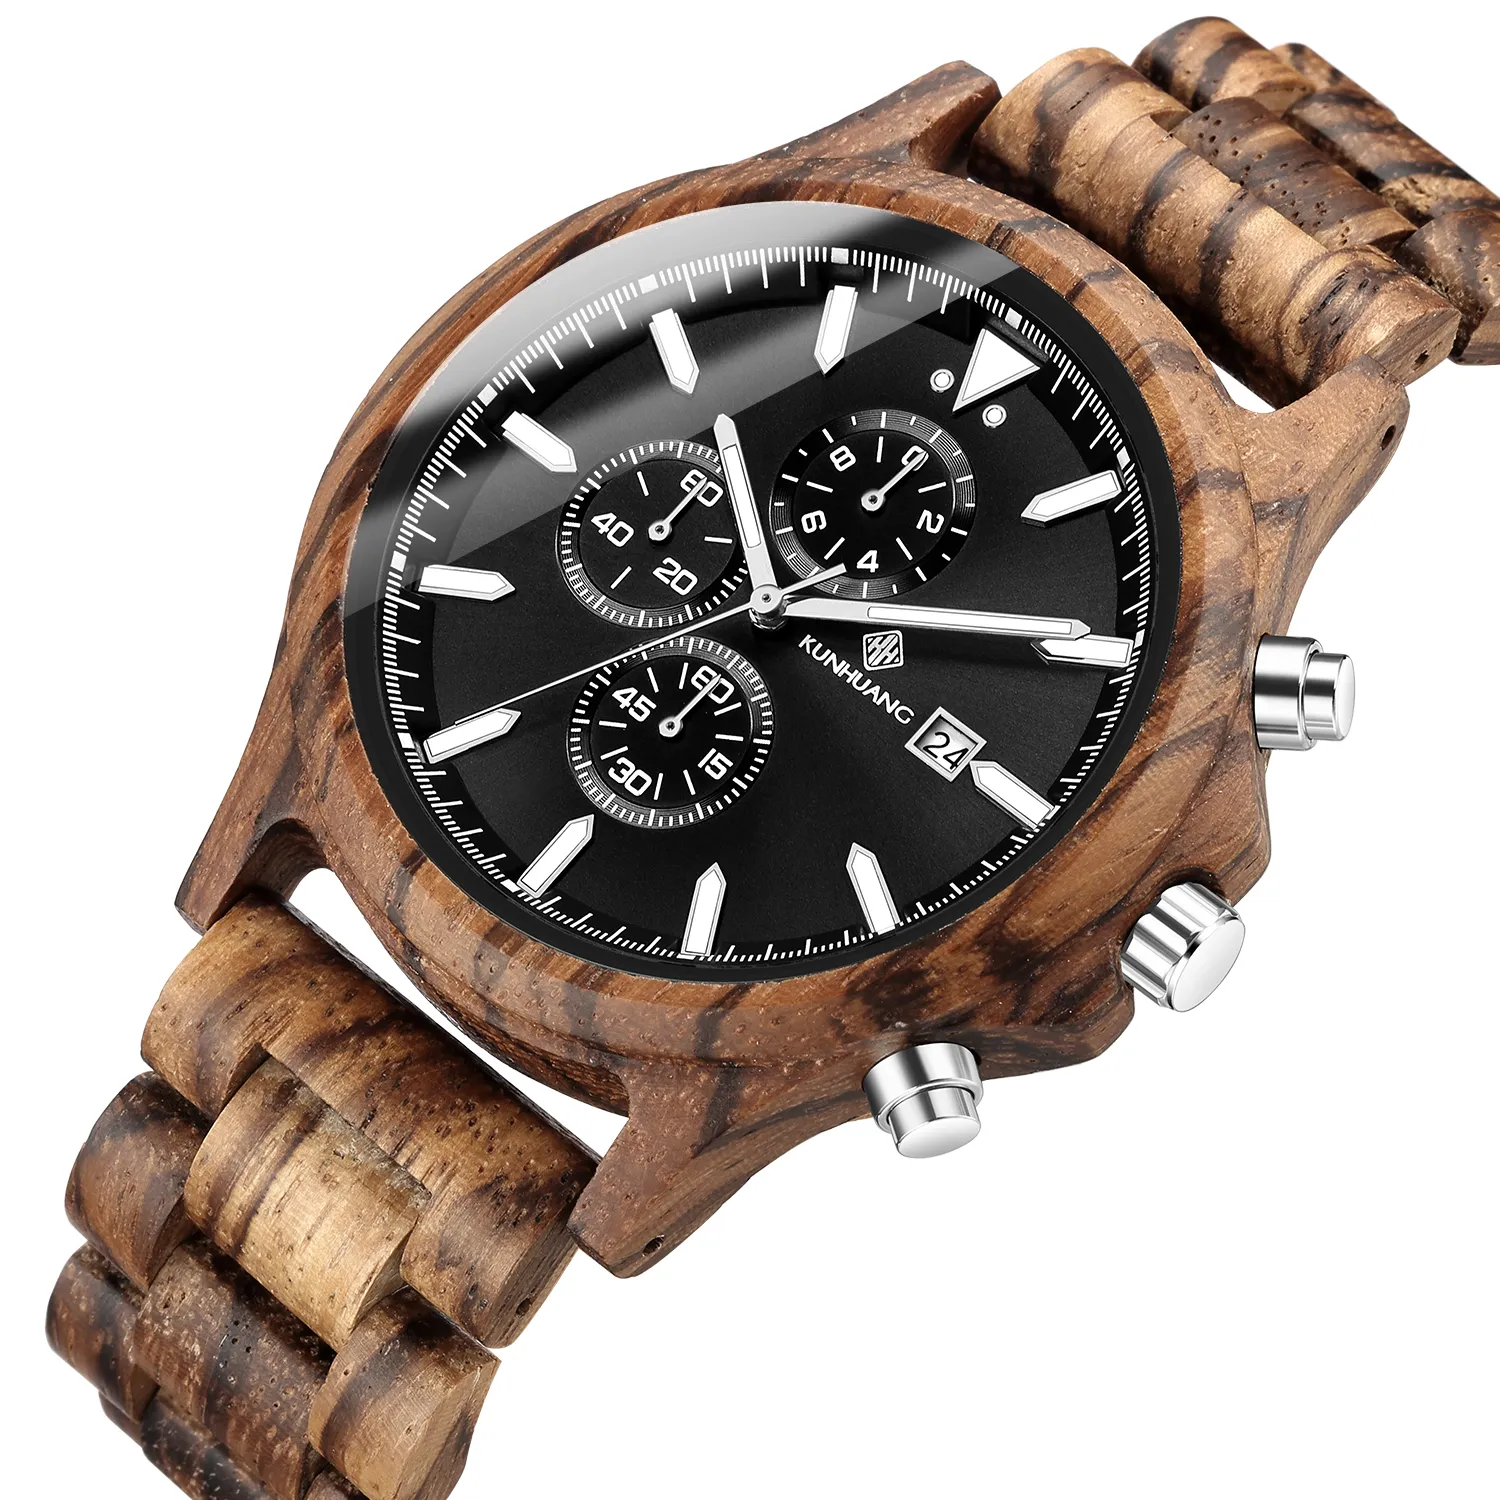 Men Wood Watch Chronograph Luxury Military Sport Watches Stylish Casual Personalized Wood Quartz Watches344y